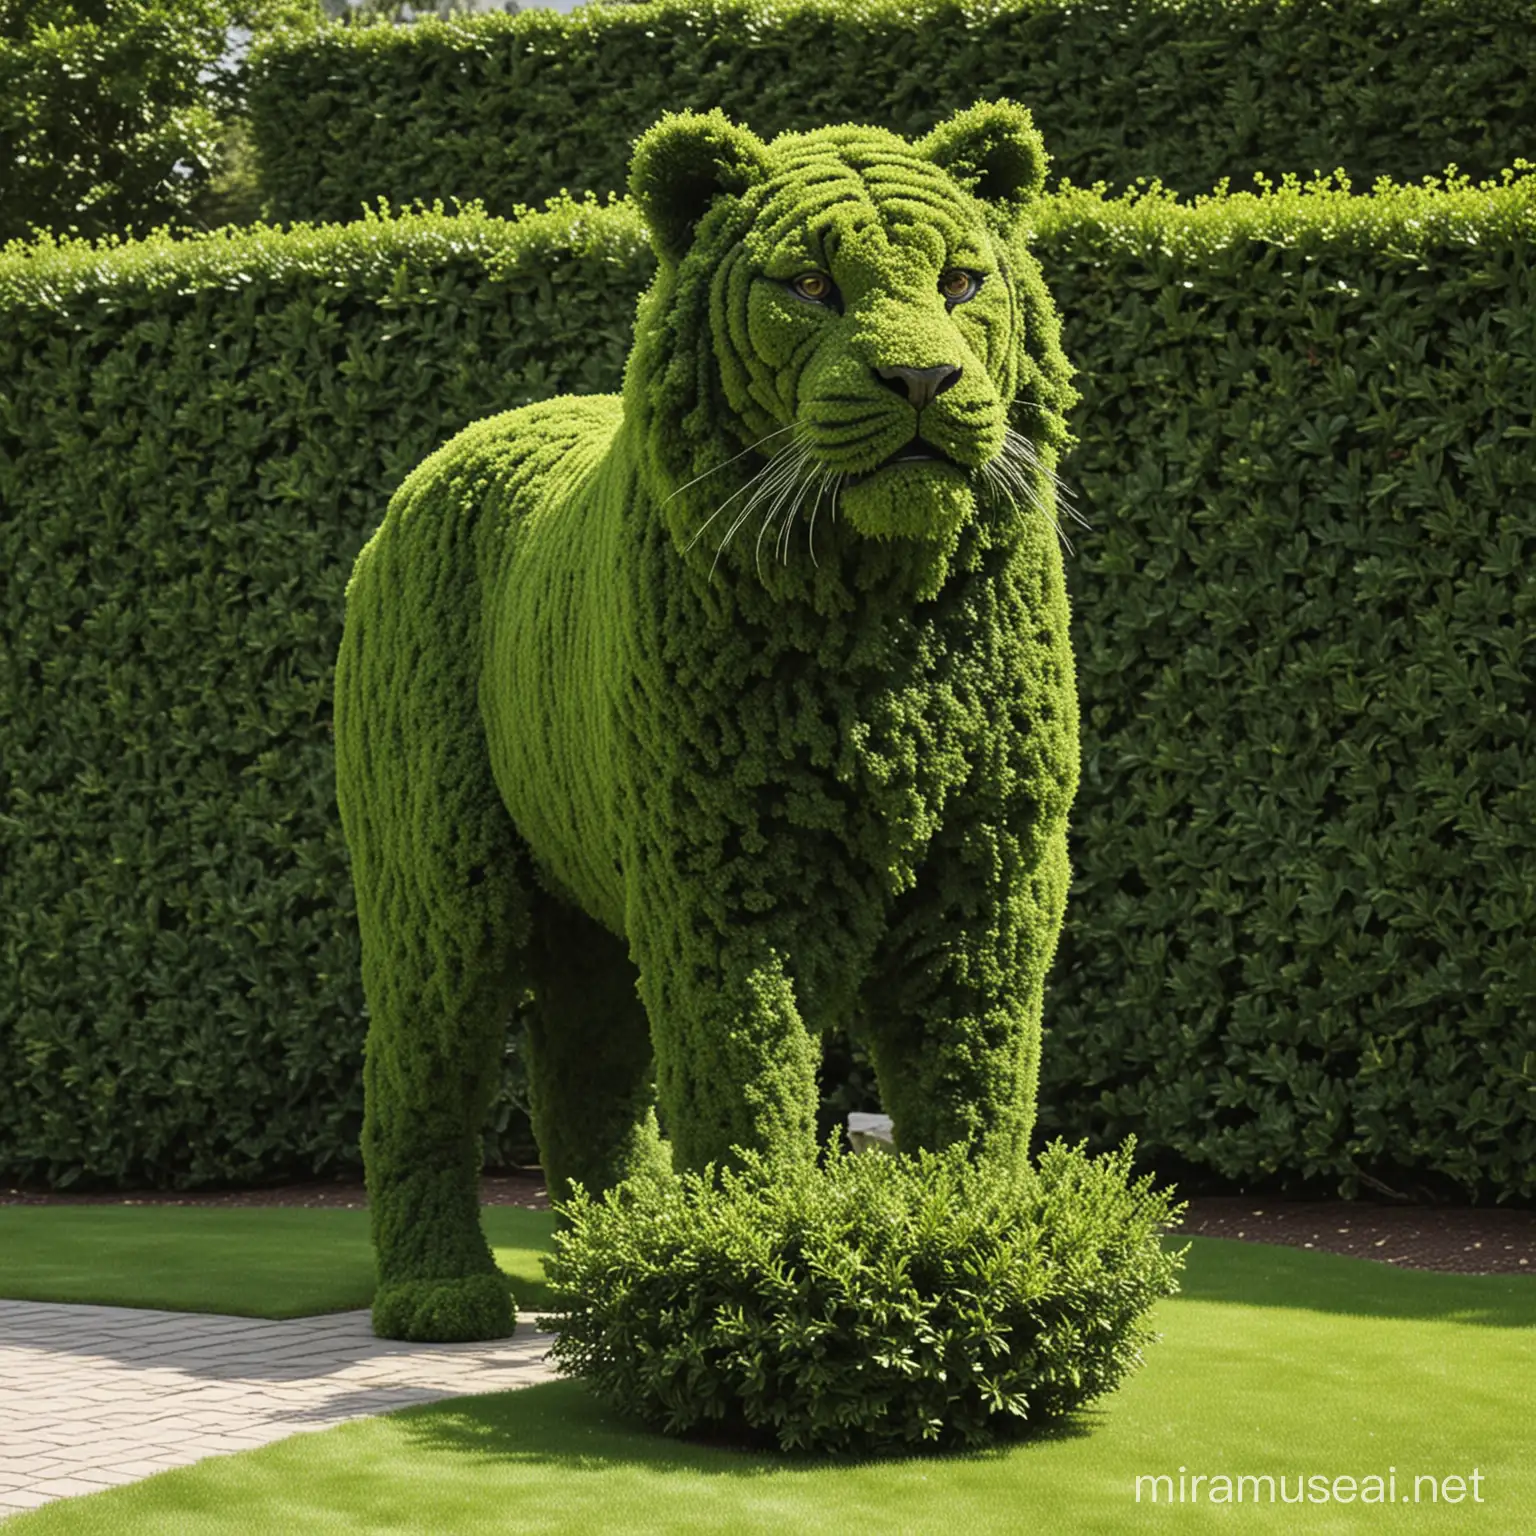 generate a green topiary bush that looks like a tiger
